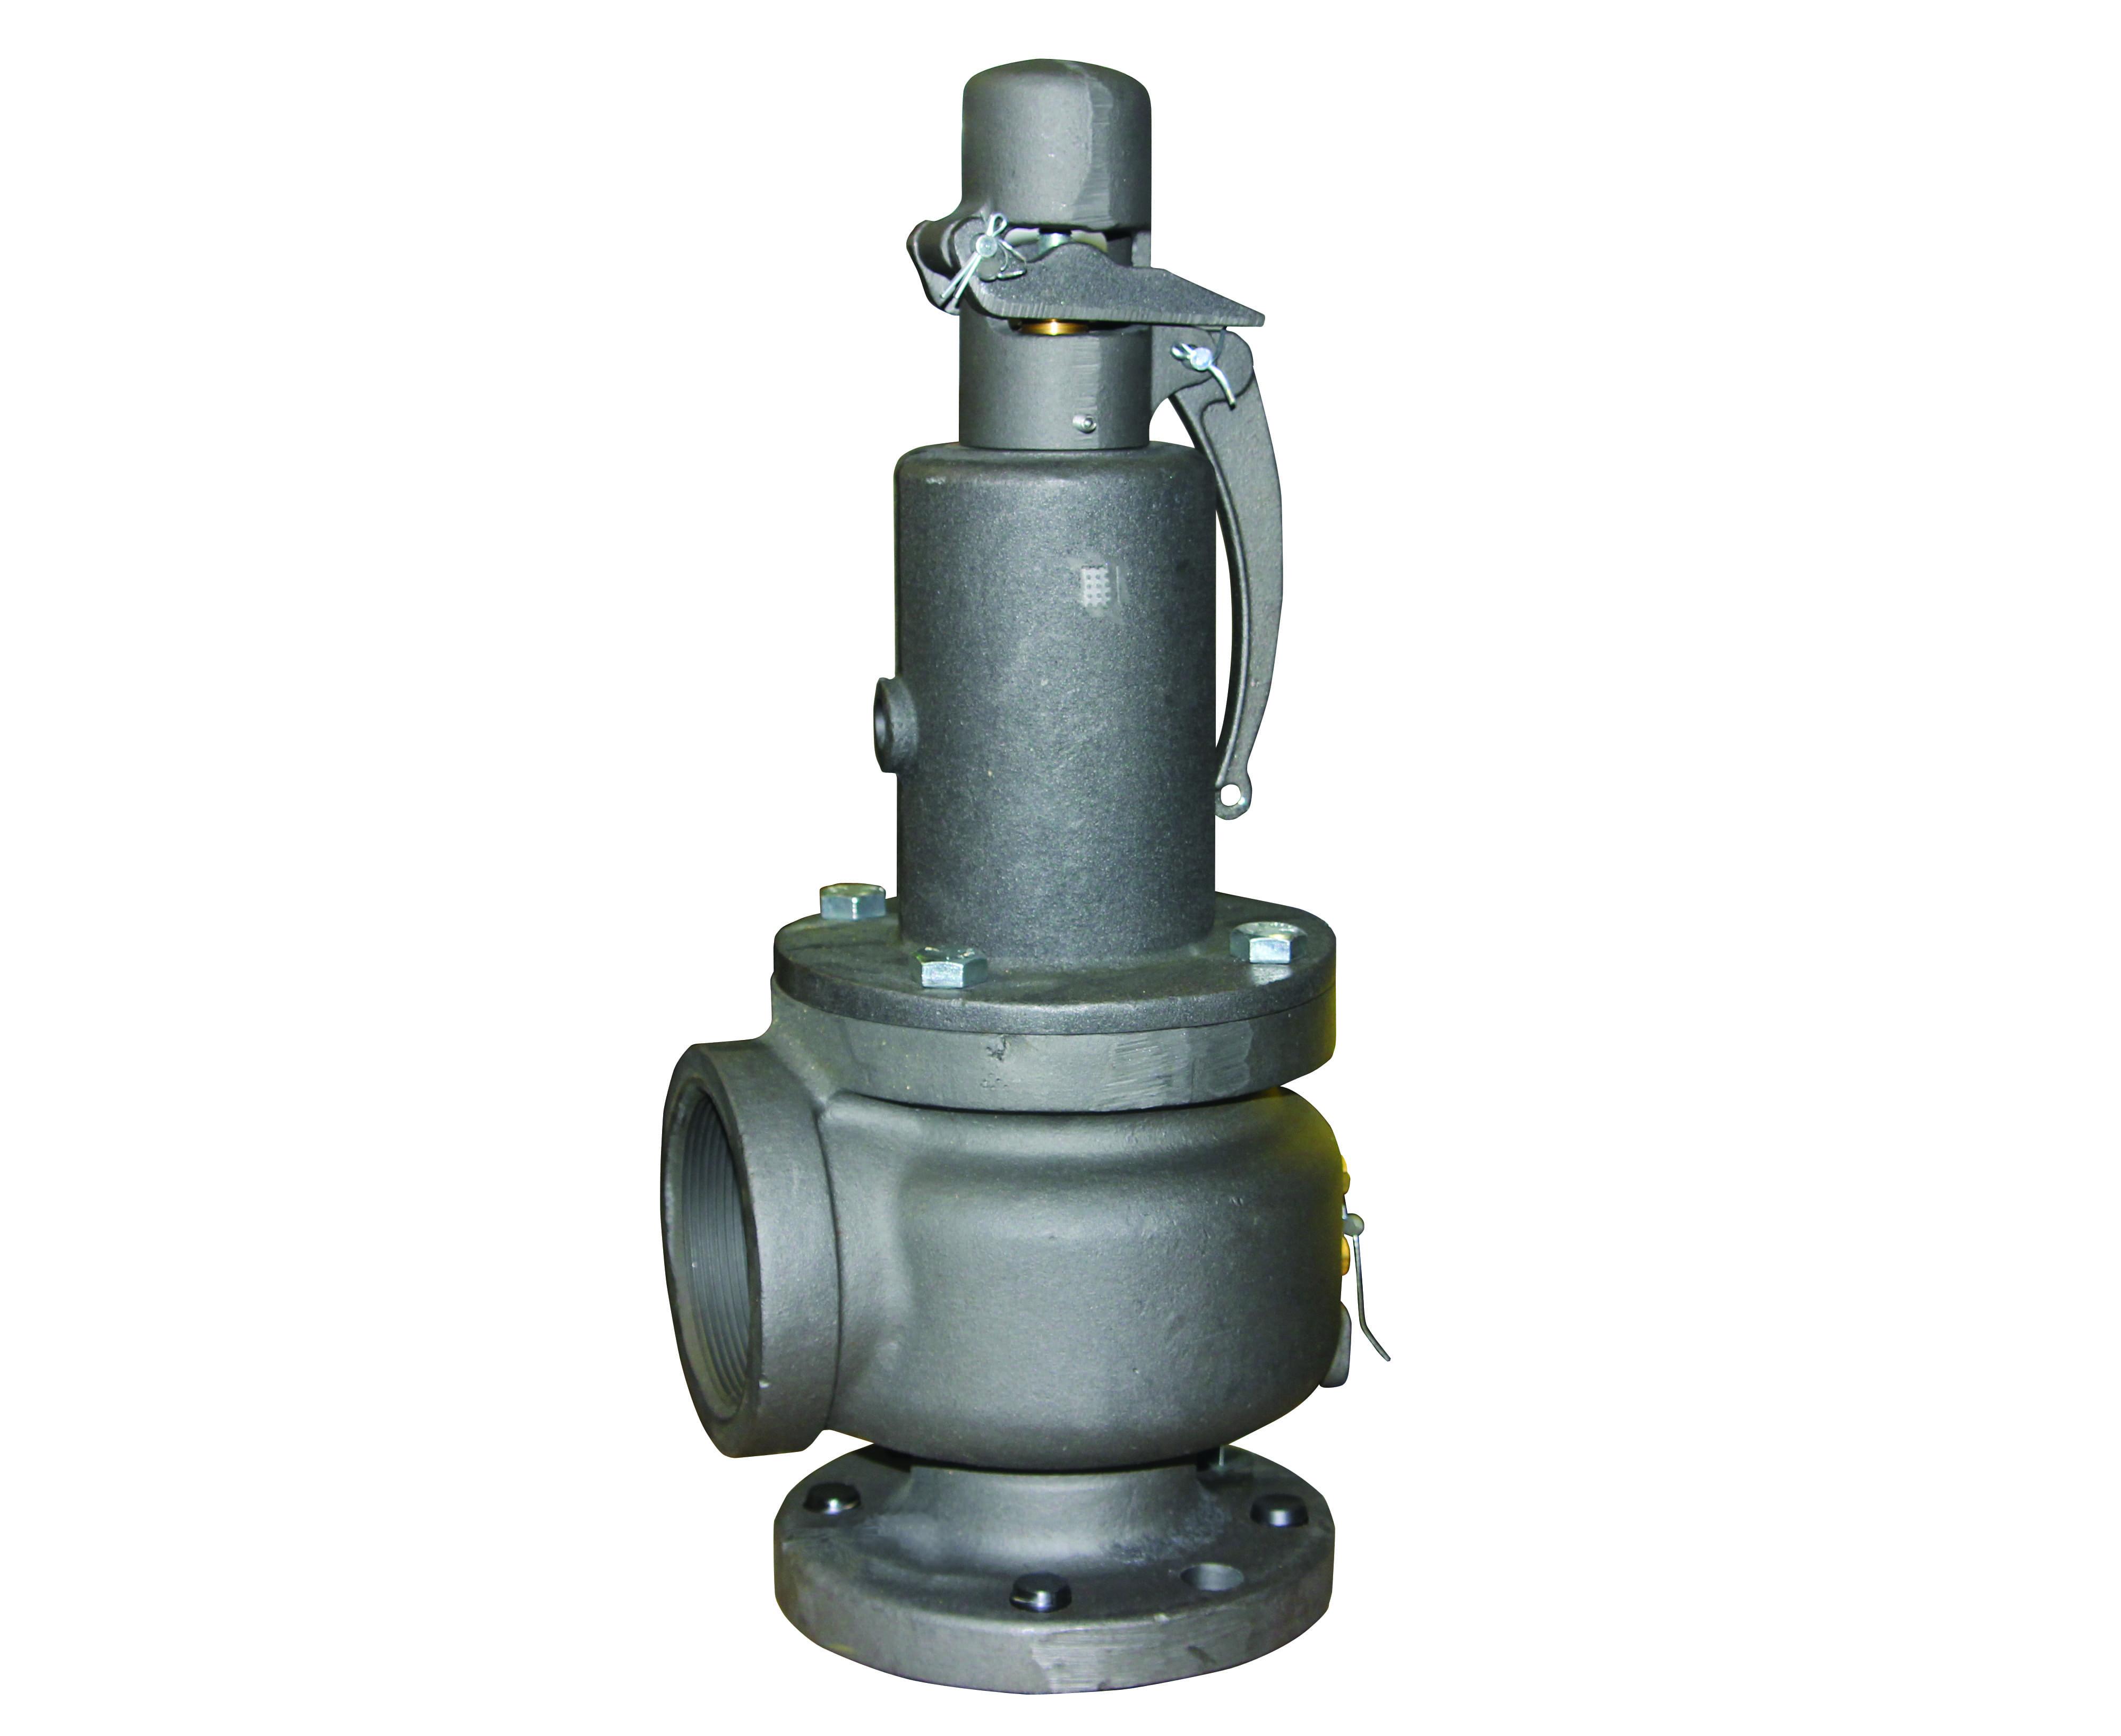 Preview image for Apollo ASME Section VIII Air Cast Iron Safety Relief Valve, 2" x 3" (Flange x FNPT)